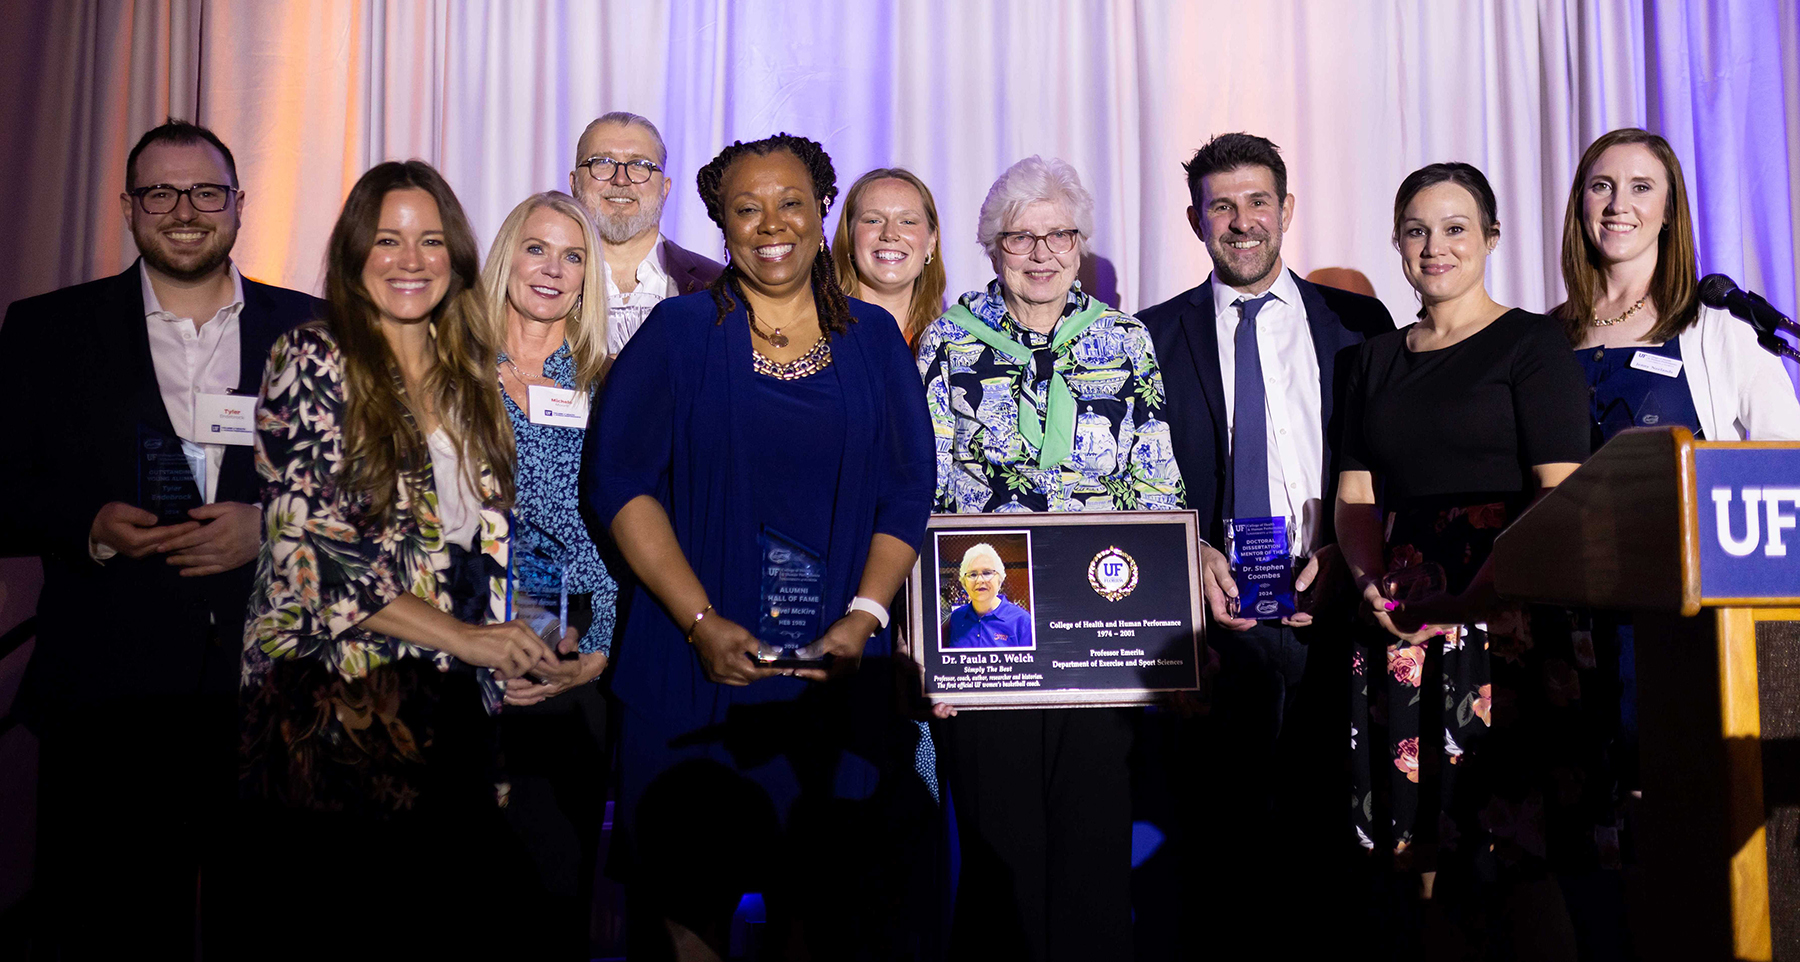 The spring award honorees included (from left) Tyler Endebrock, Raquel Braun, Michele Moore, Brian Carwile, Trivel McKire, Kelsey Garrison, Paula Welch, Stephen Coombes, Anna Gardner and Jenny Neelands.